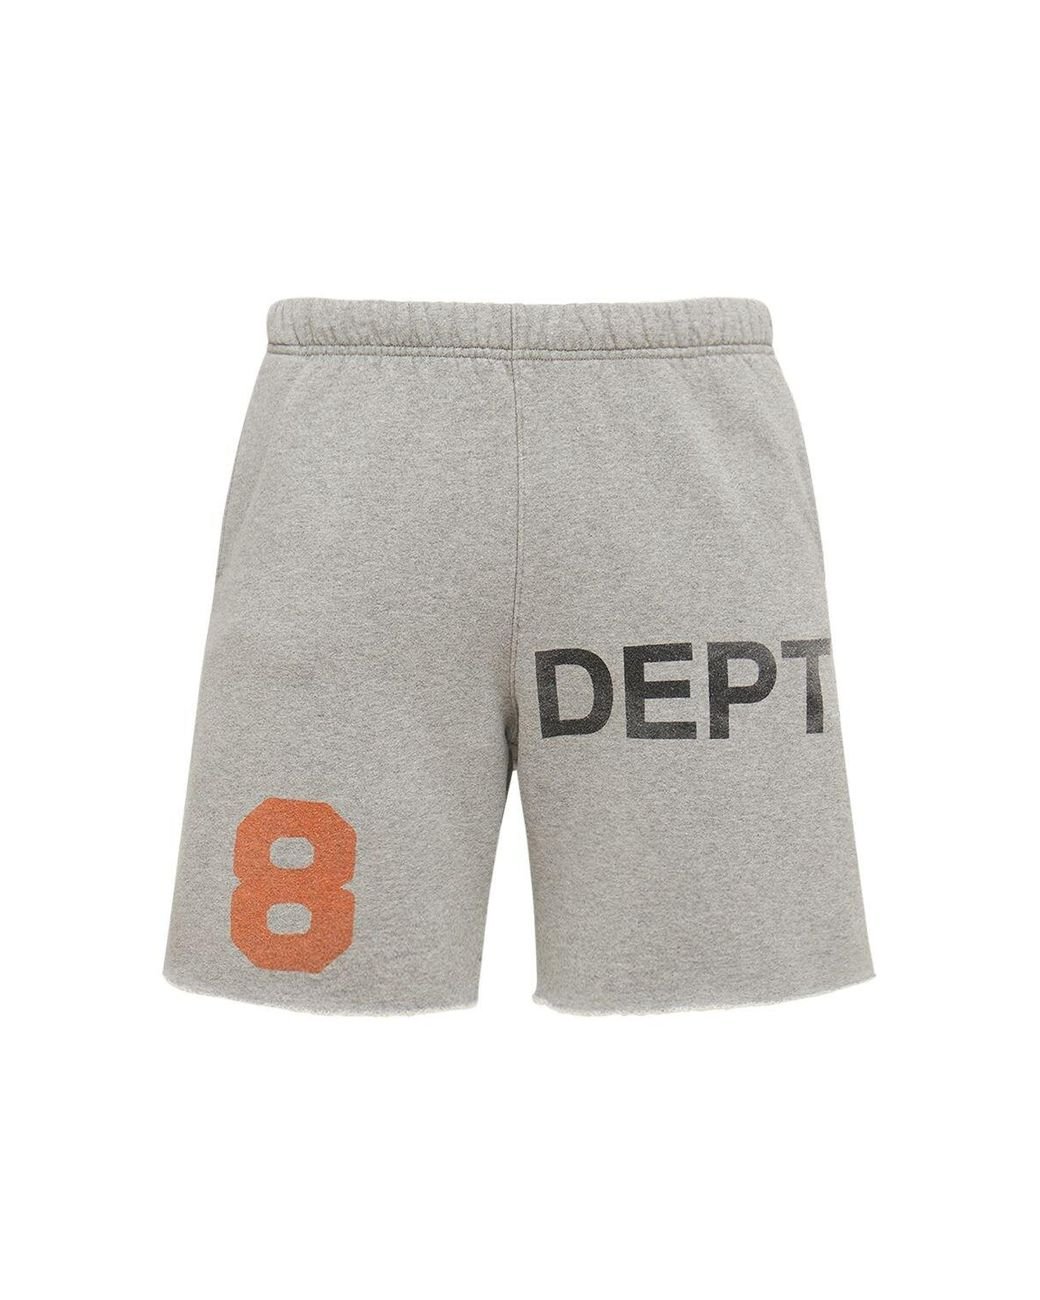 GALLERY DEPT. Logo Vintage Printed Cotton Sweat Shorts in Gray for 